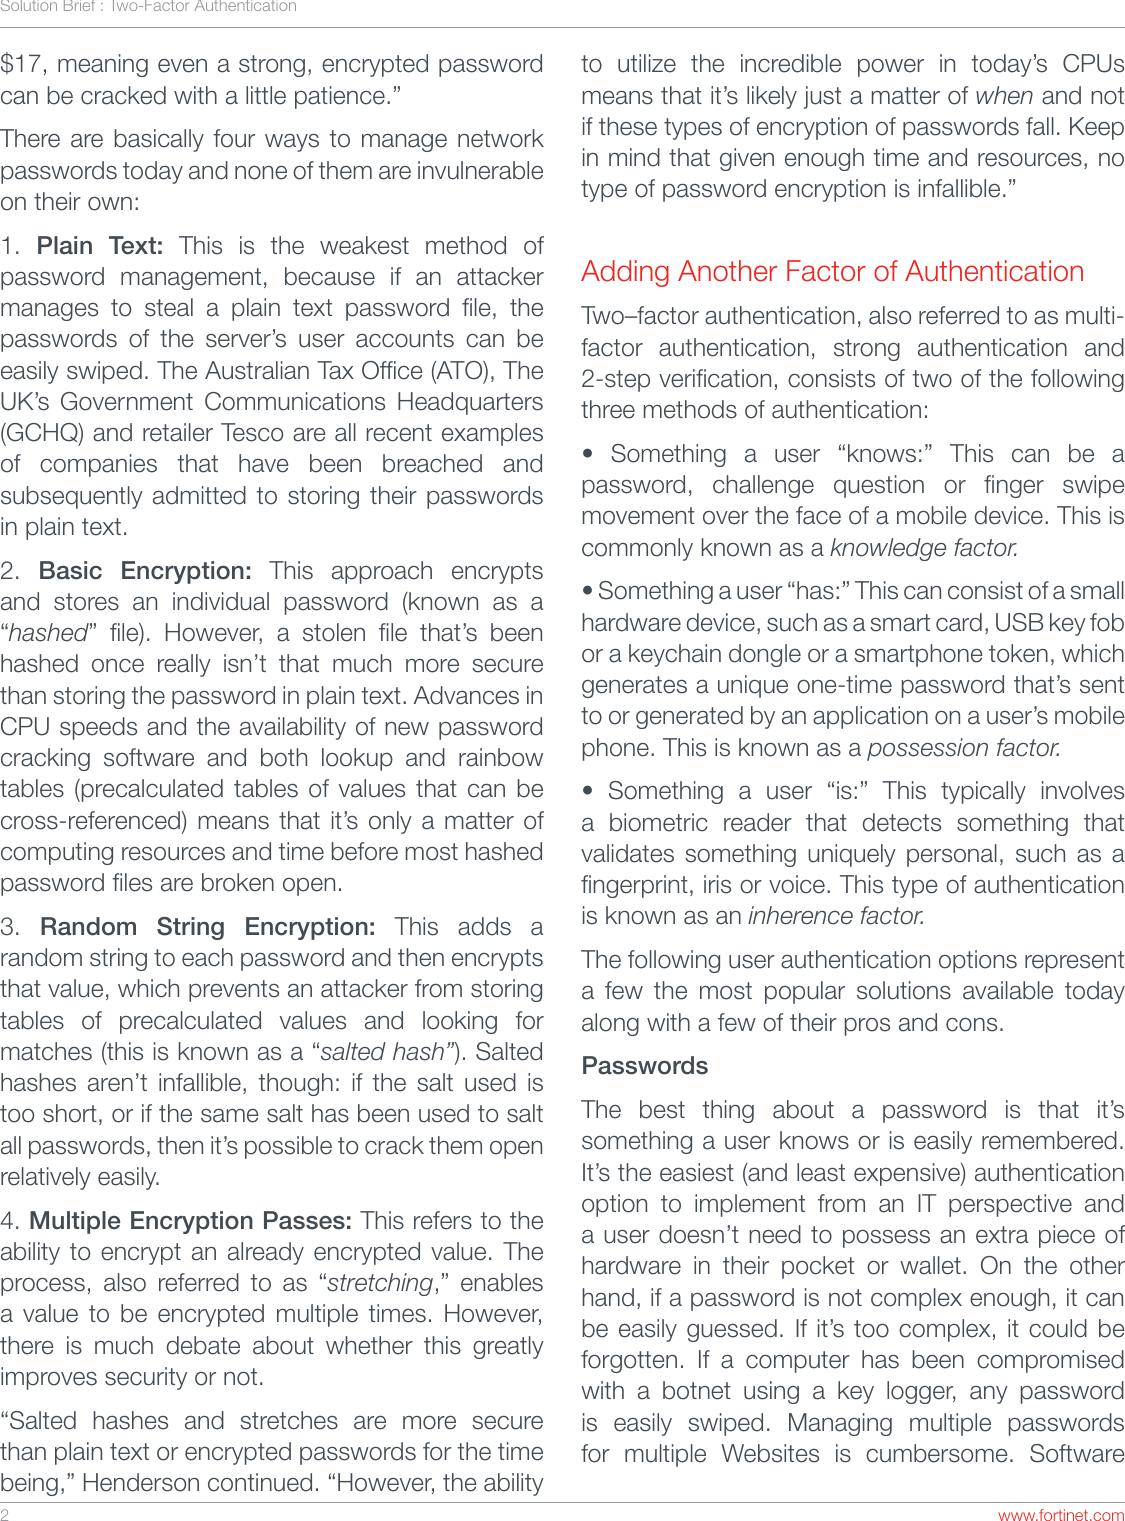 Page 2 of 4 - Solution-Brief-Two-Factor-Authentication